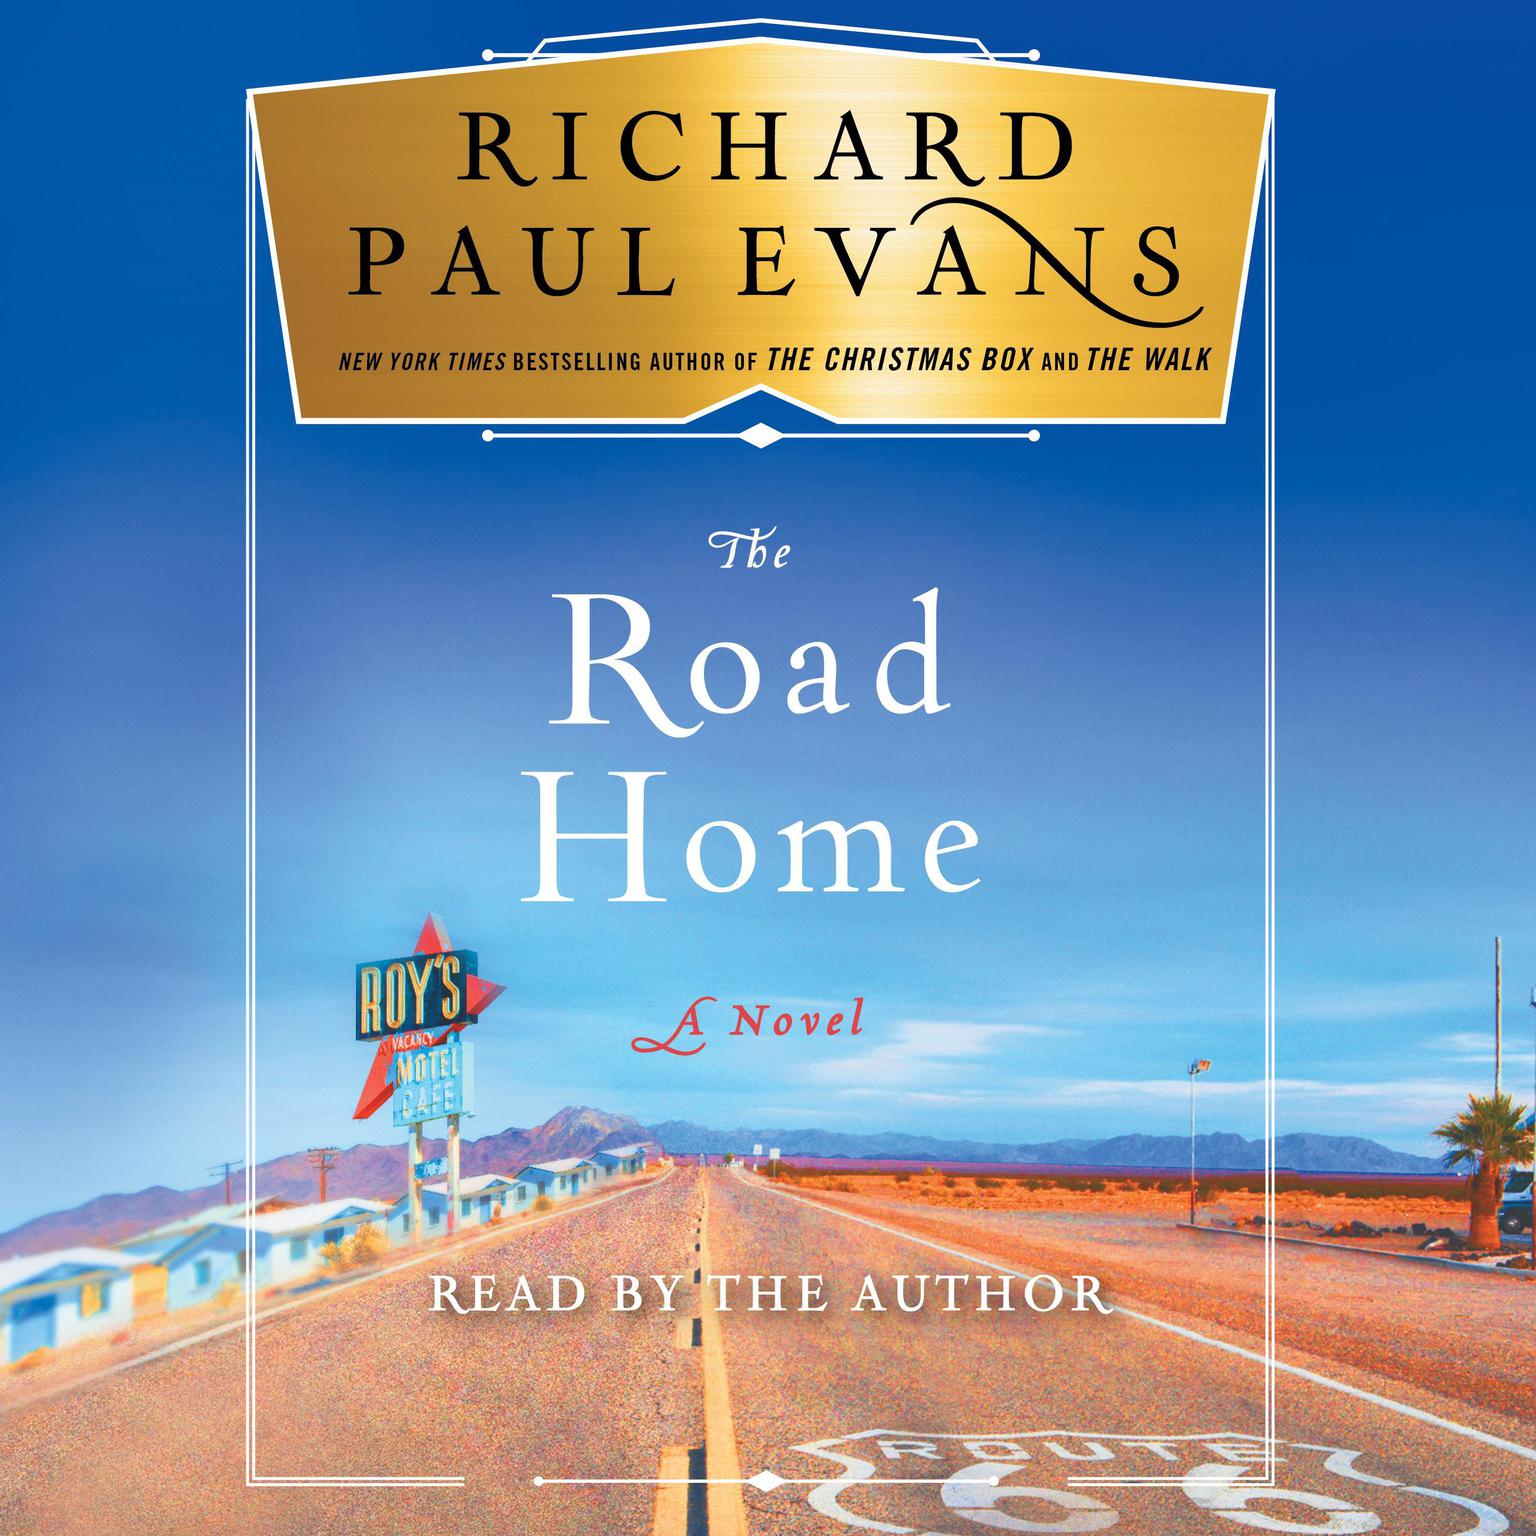 The Road Home Audiobook, by Richard Paul Evans